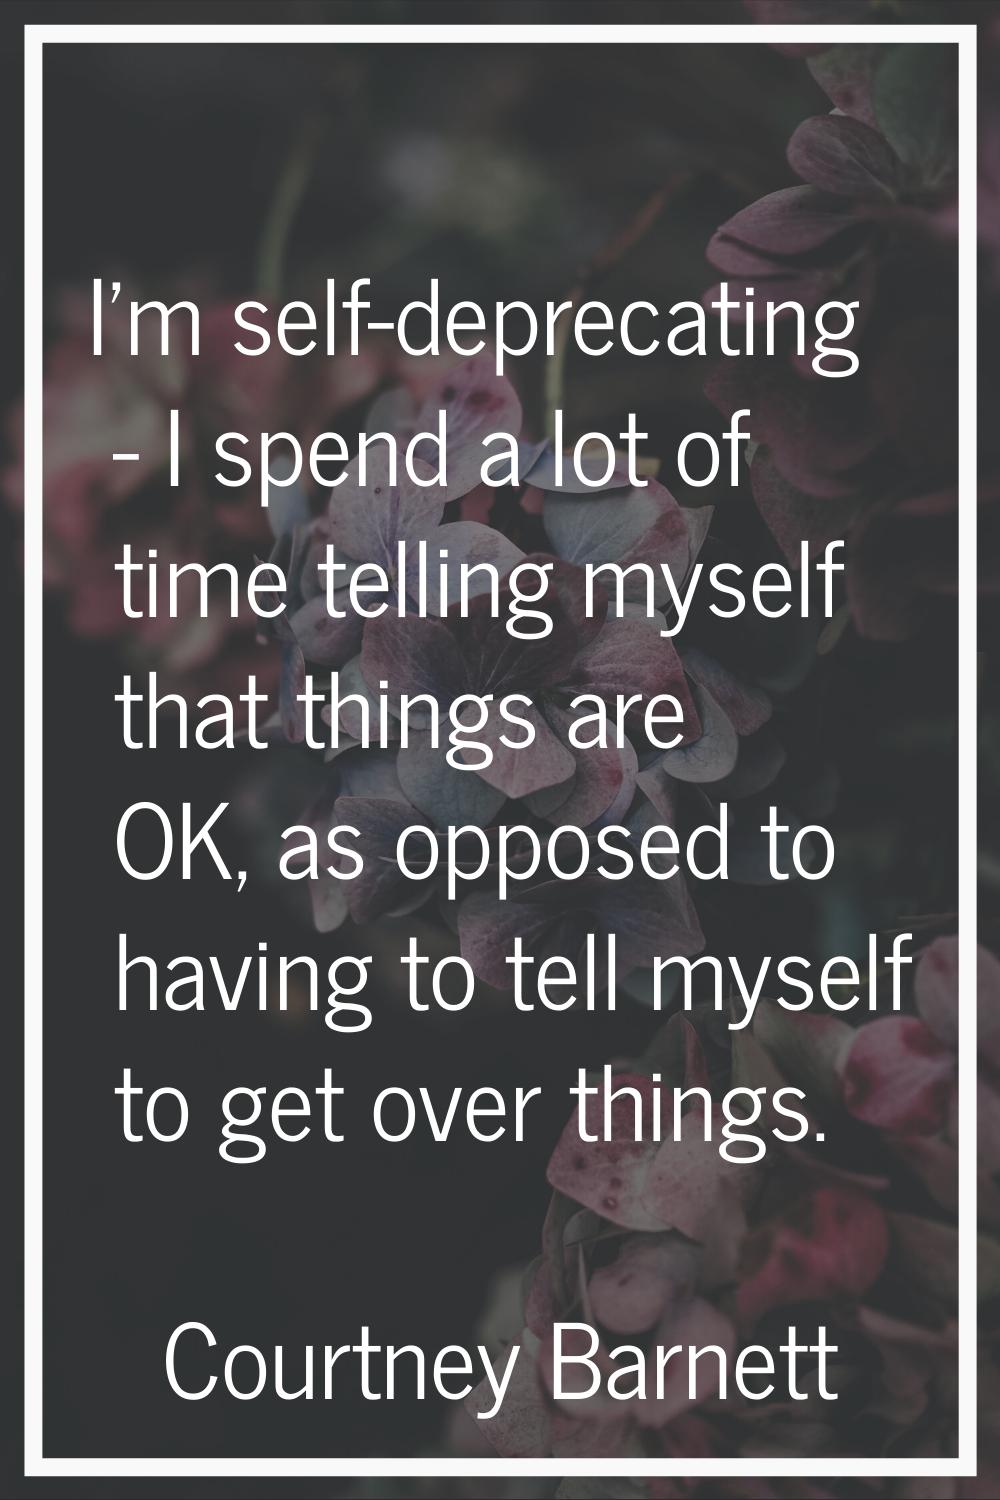 I'm self-deprecating - I spend a lot of time telling myself that things are OK, as opposed to havin